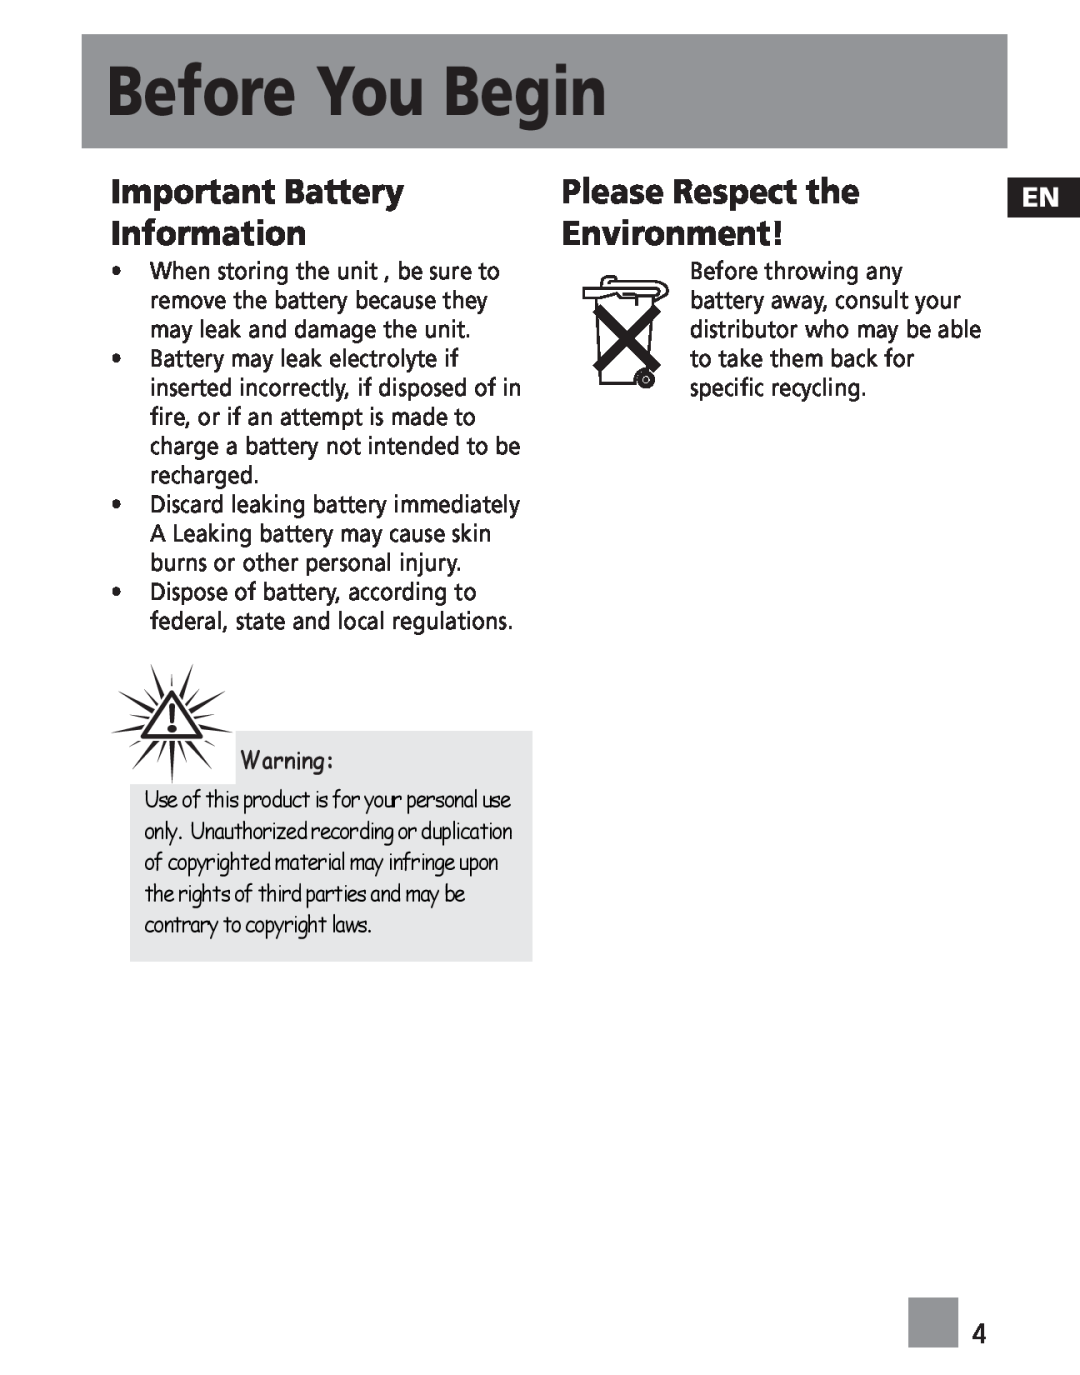 RCA MC202, M2030, M202, M2011, M2000 Important Battery Information, Please Respect the, Environment, Before You Begin 